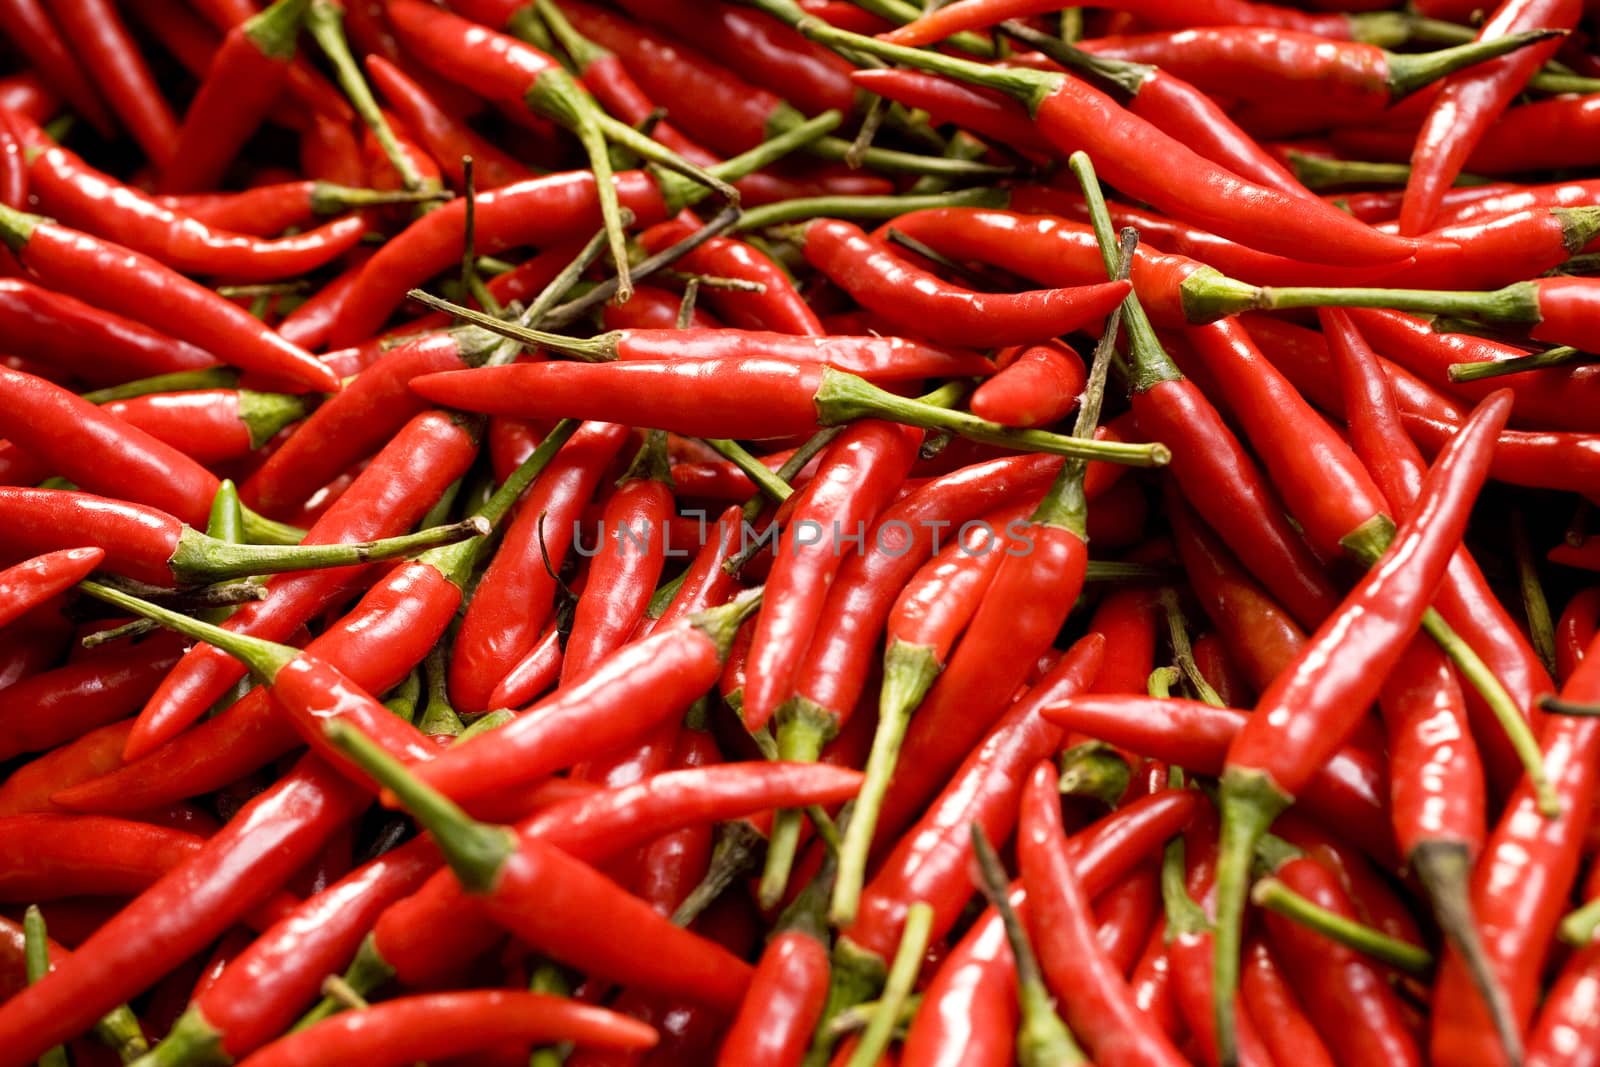  Red Chili Peppers Close-up Background by janssenkruseproductions